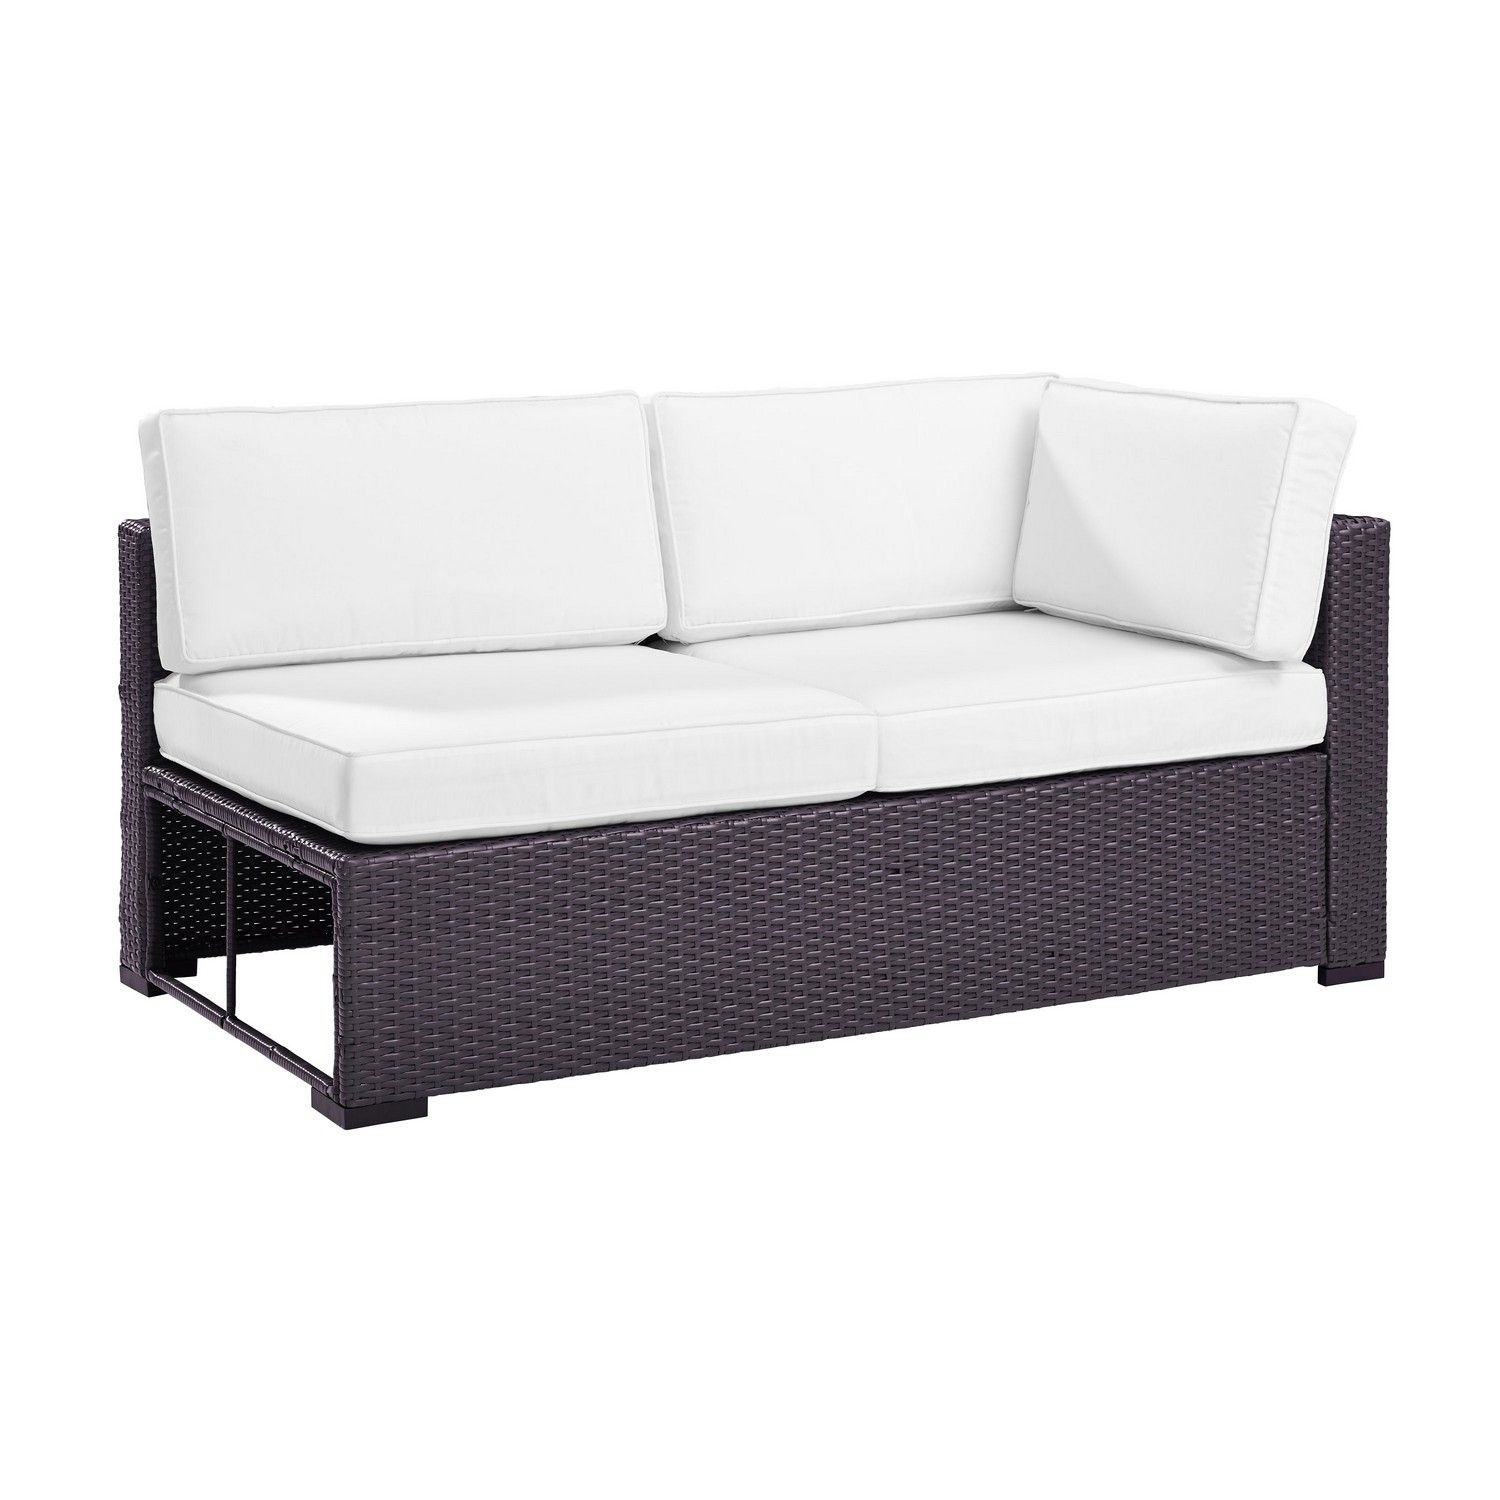 Crosley Biscayne Outdoor Wicker Sectional Loveseat - White/Brown